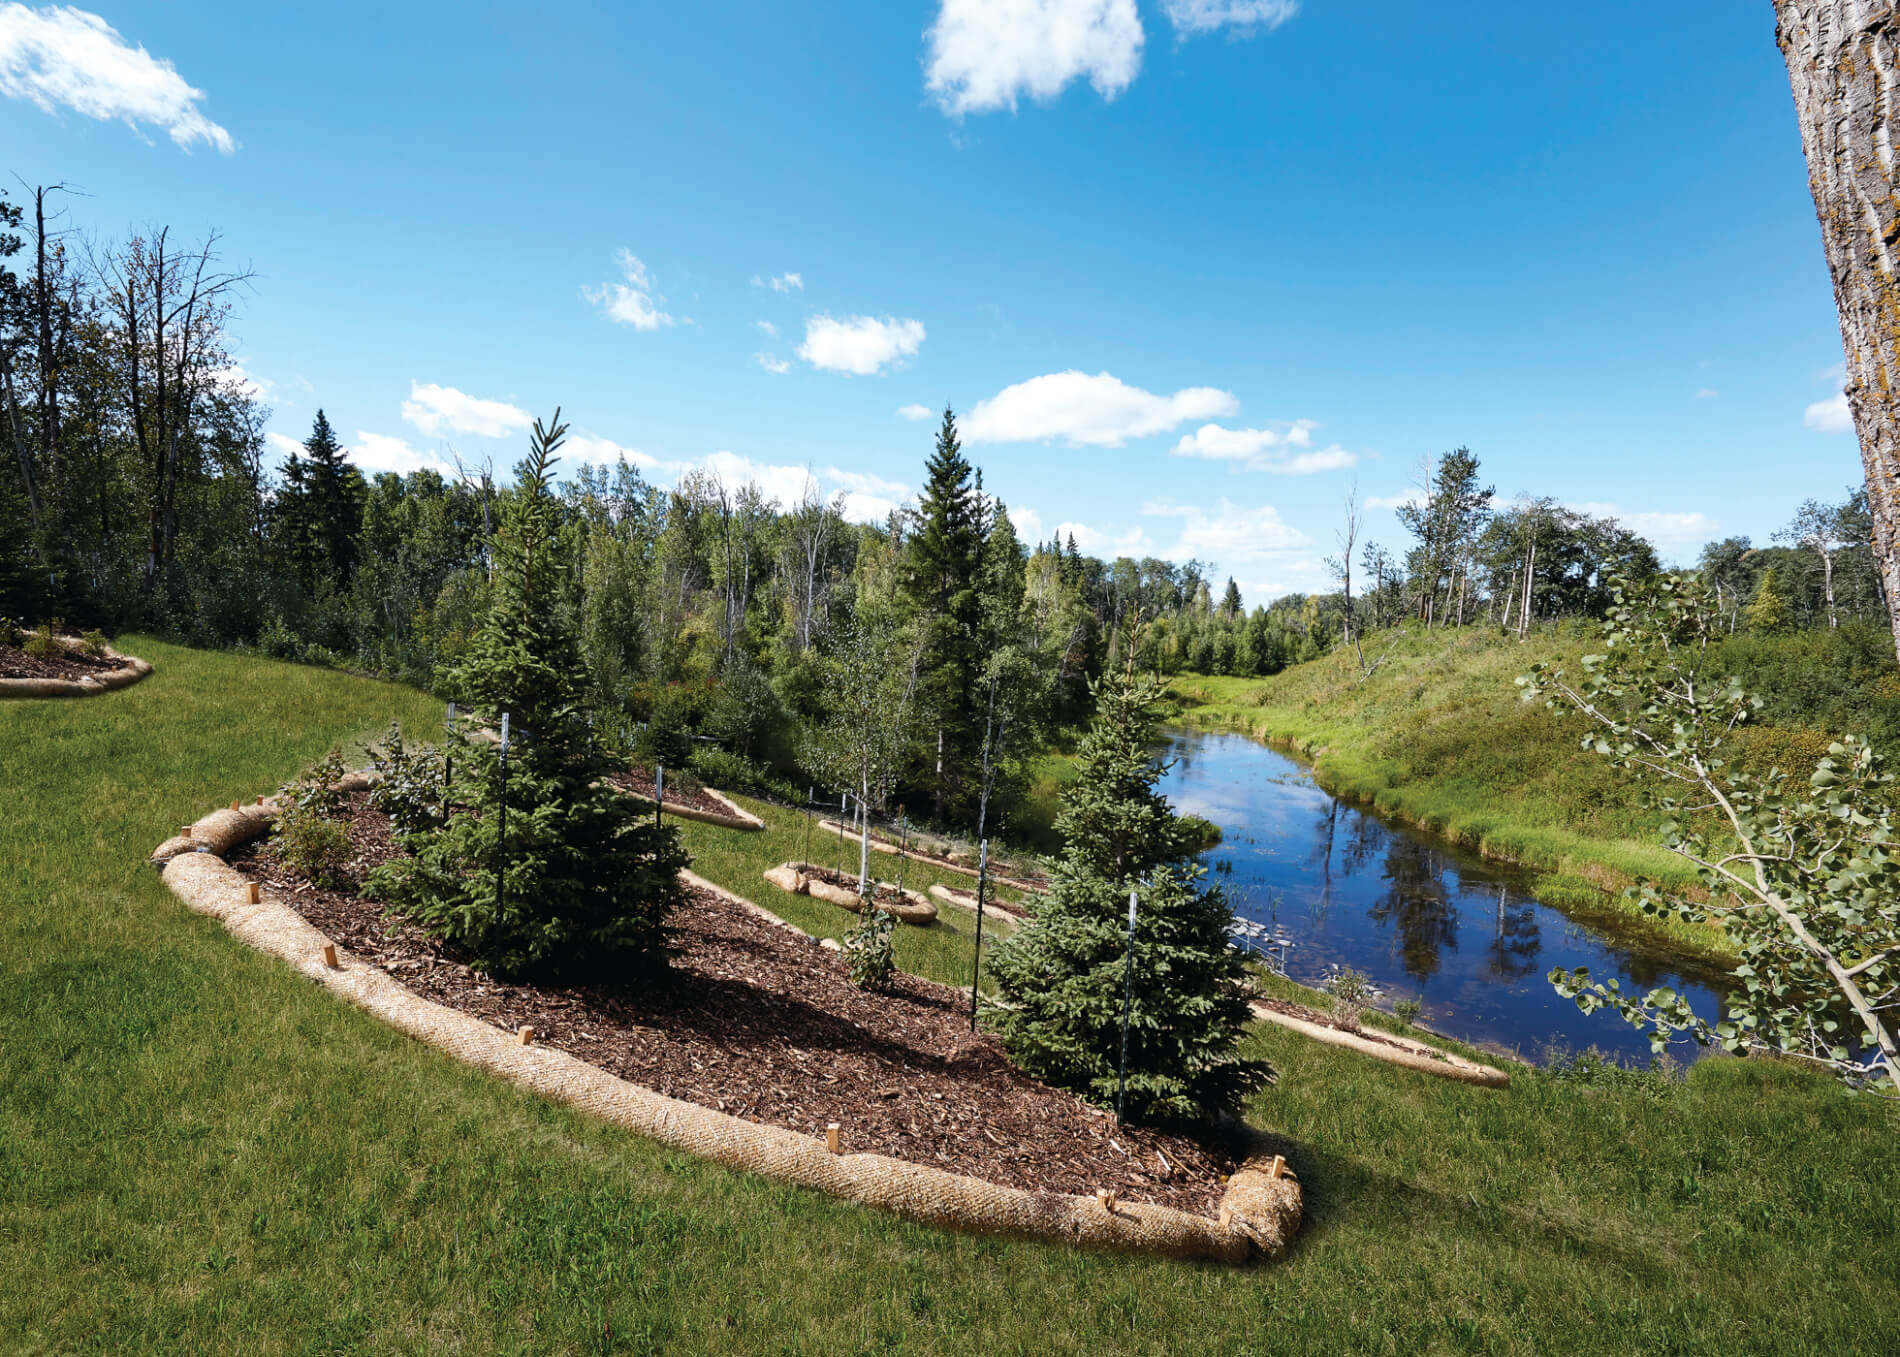 Uplands at Riverview trees and water feature